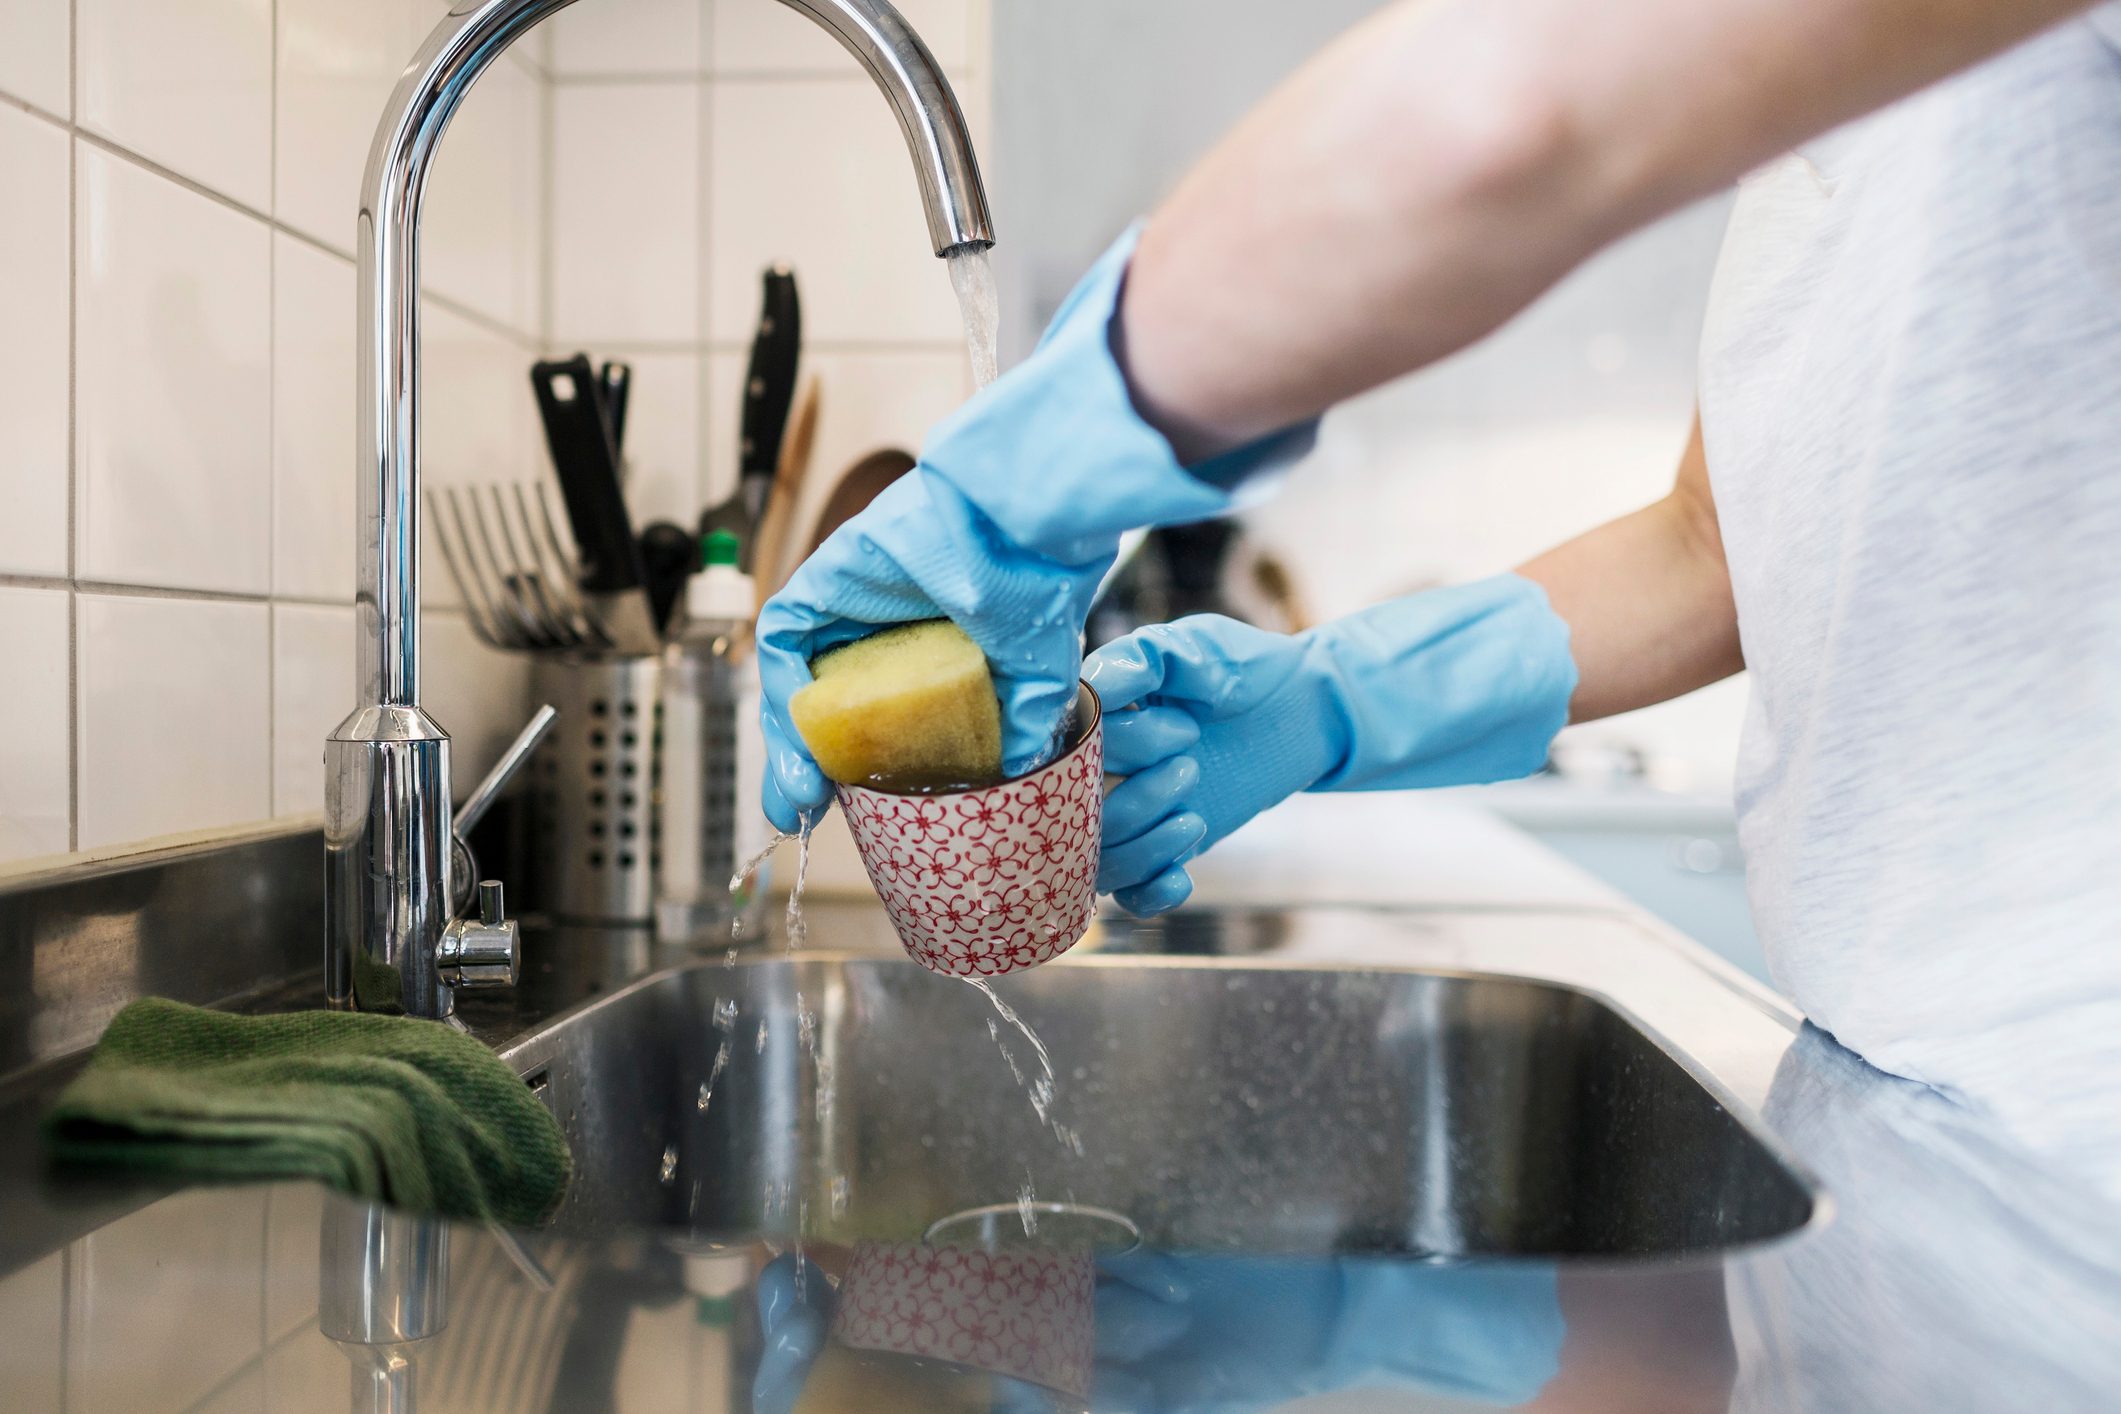 Wondering What To Do With Your Germ-y Kitchen Sponge? - Center for